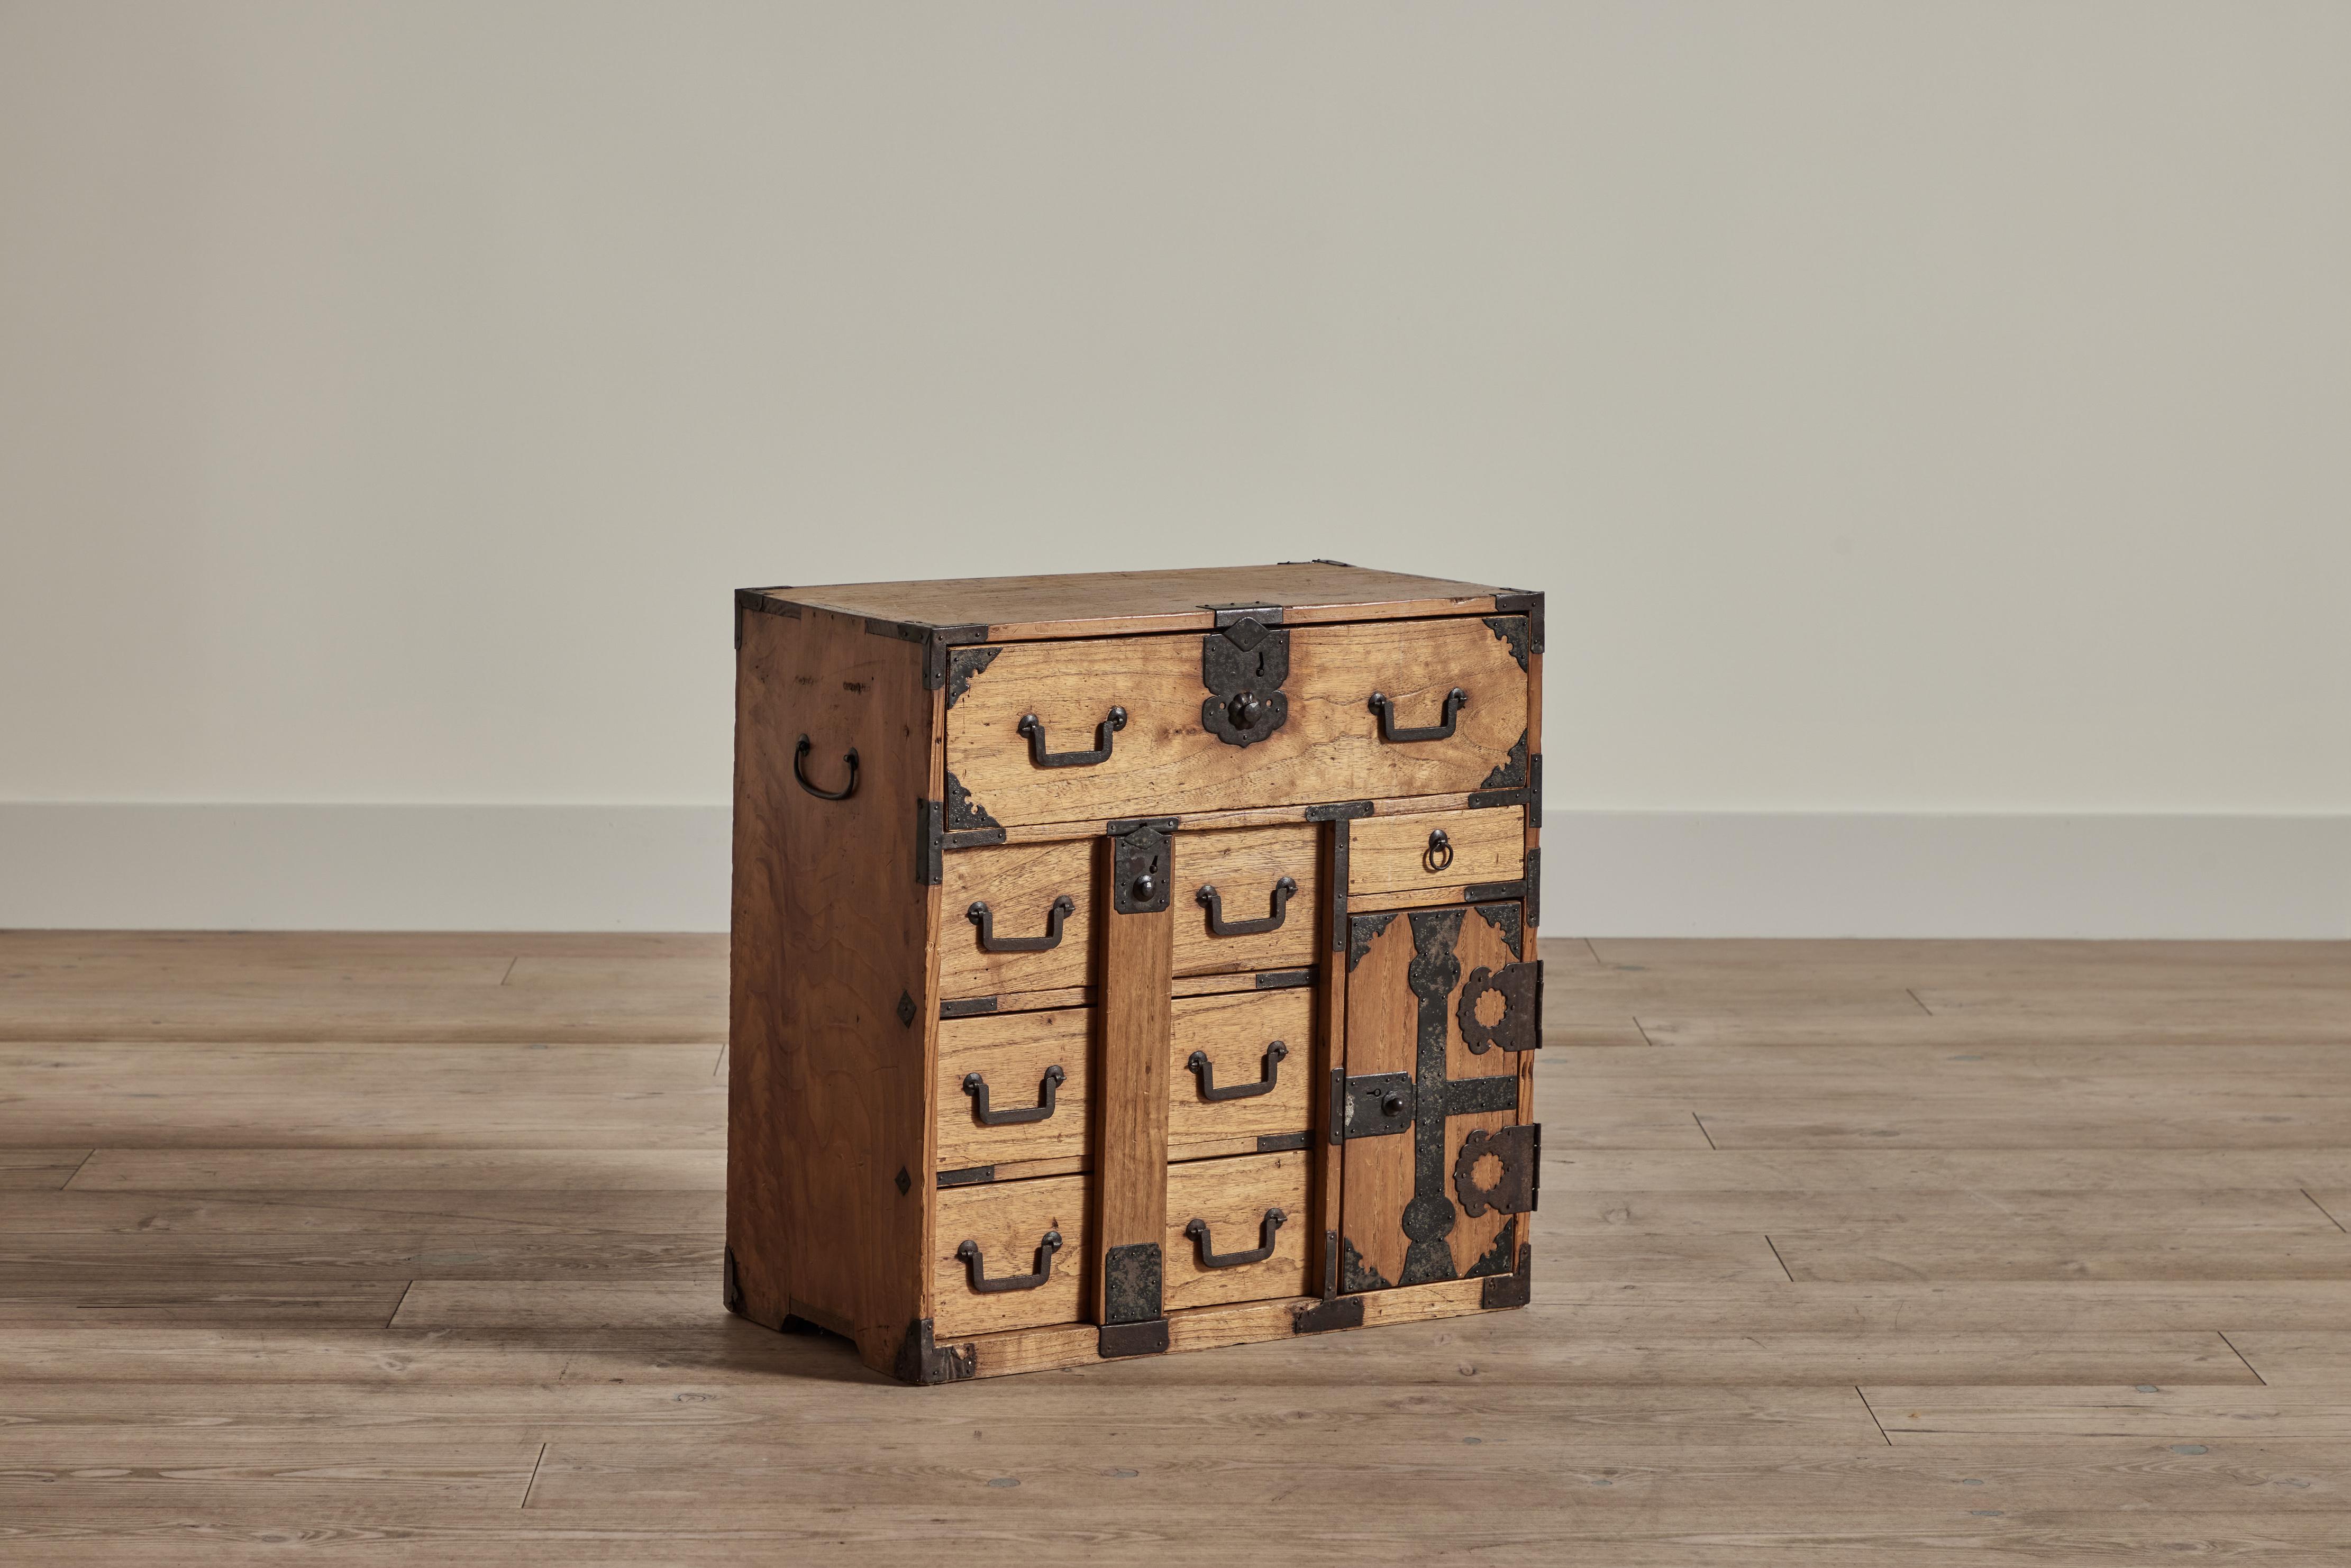 Japanese cho dansu merchant’s storage chest made of kiri wood and iron hardware. Wear on wood and irony hardware is consistent with age and use. 